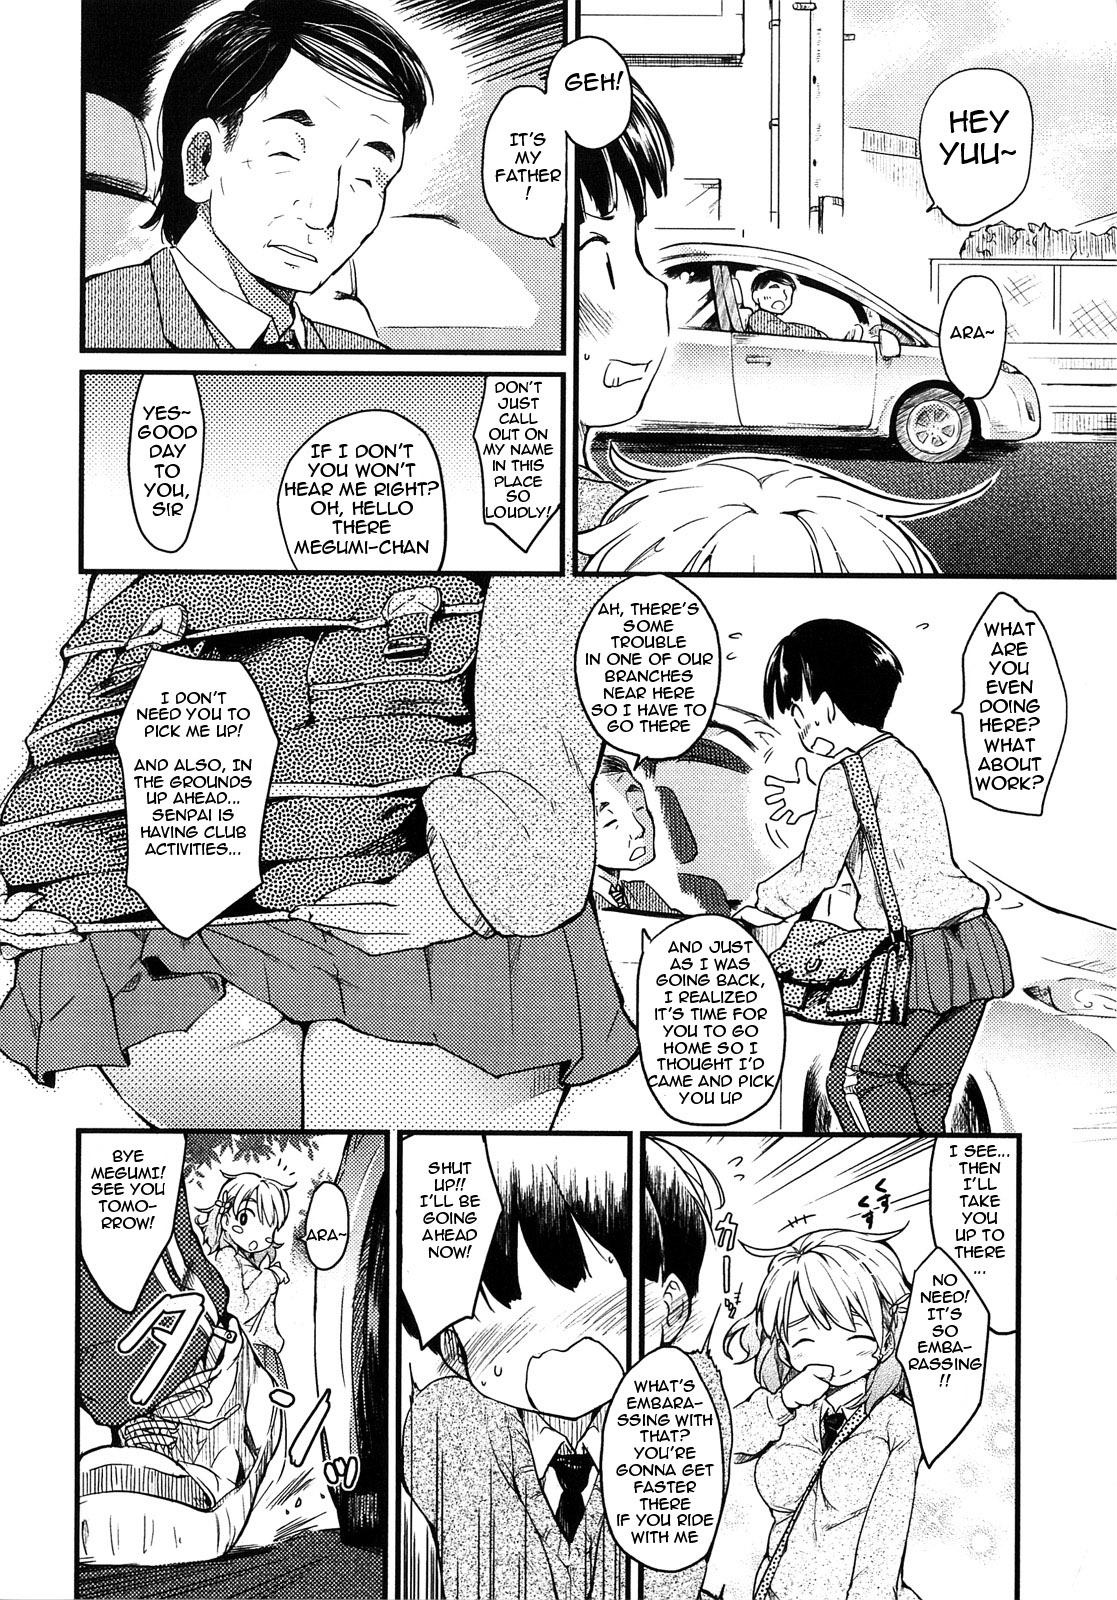 [Higenamuchi] An Older Person [English] + Extra chapter 1